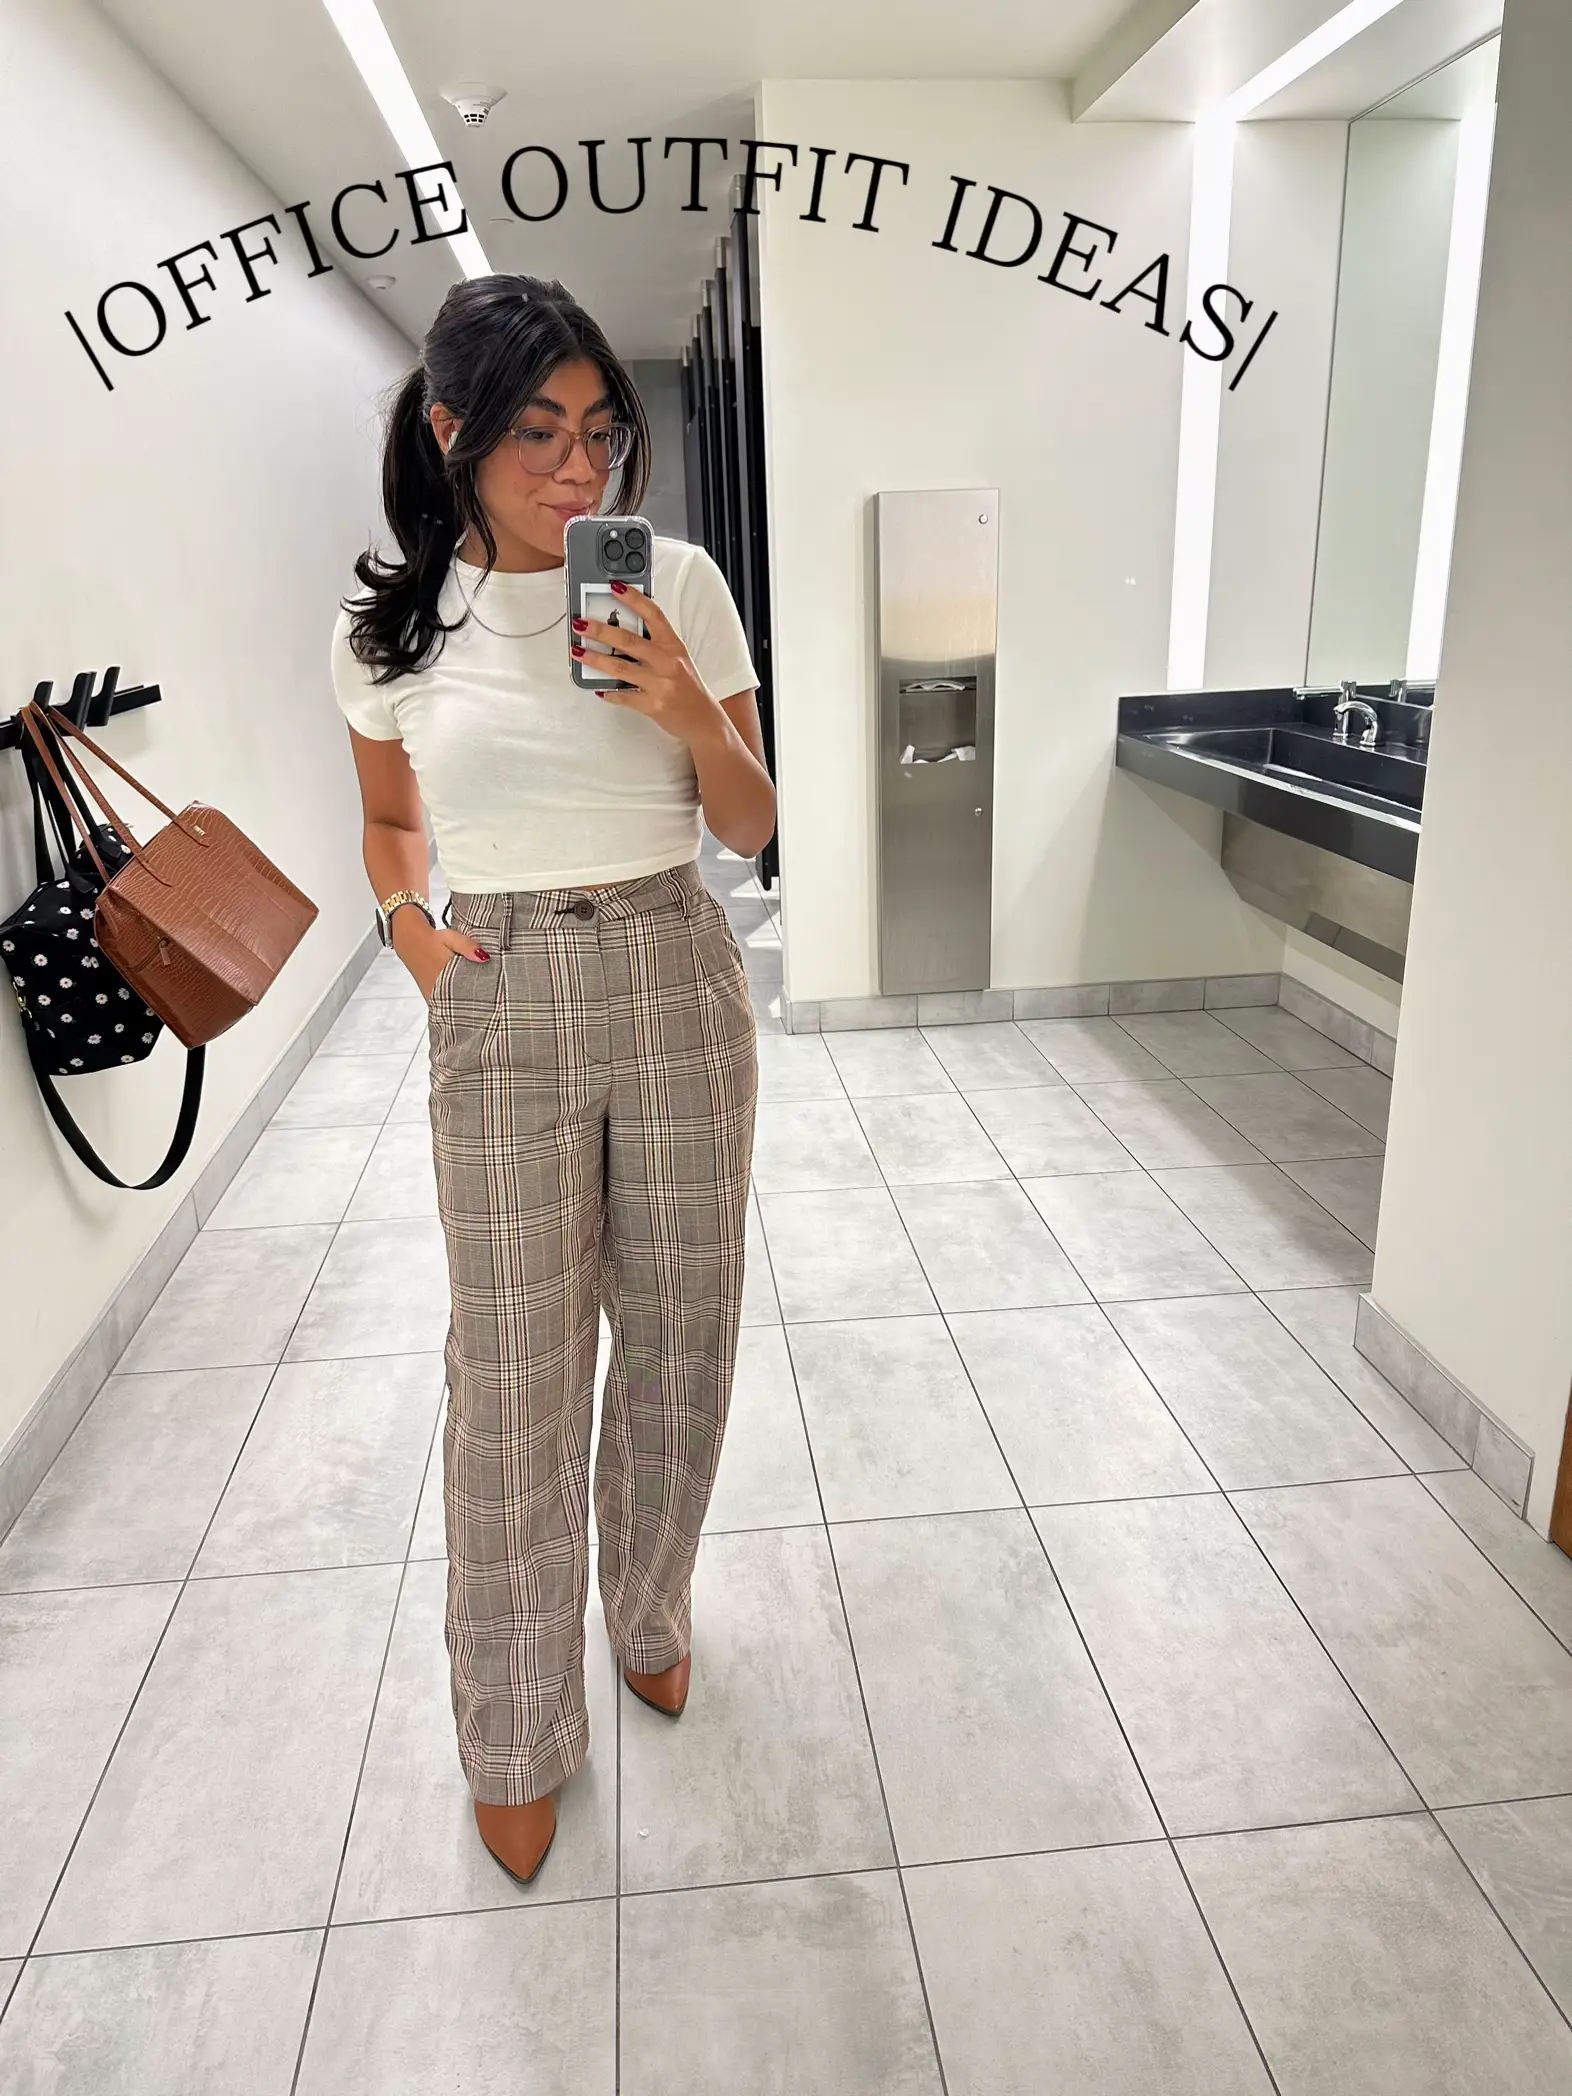 A Week in Outfits - WFH and Office outfit ideas - Lilly Style